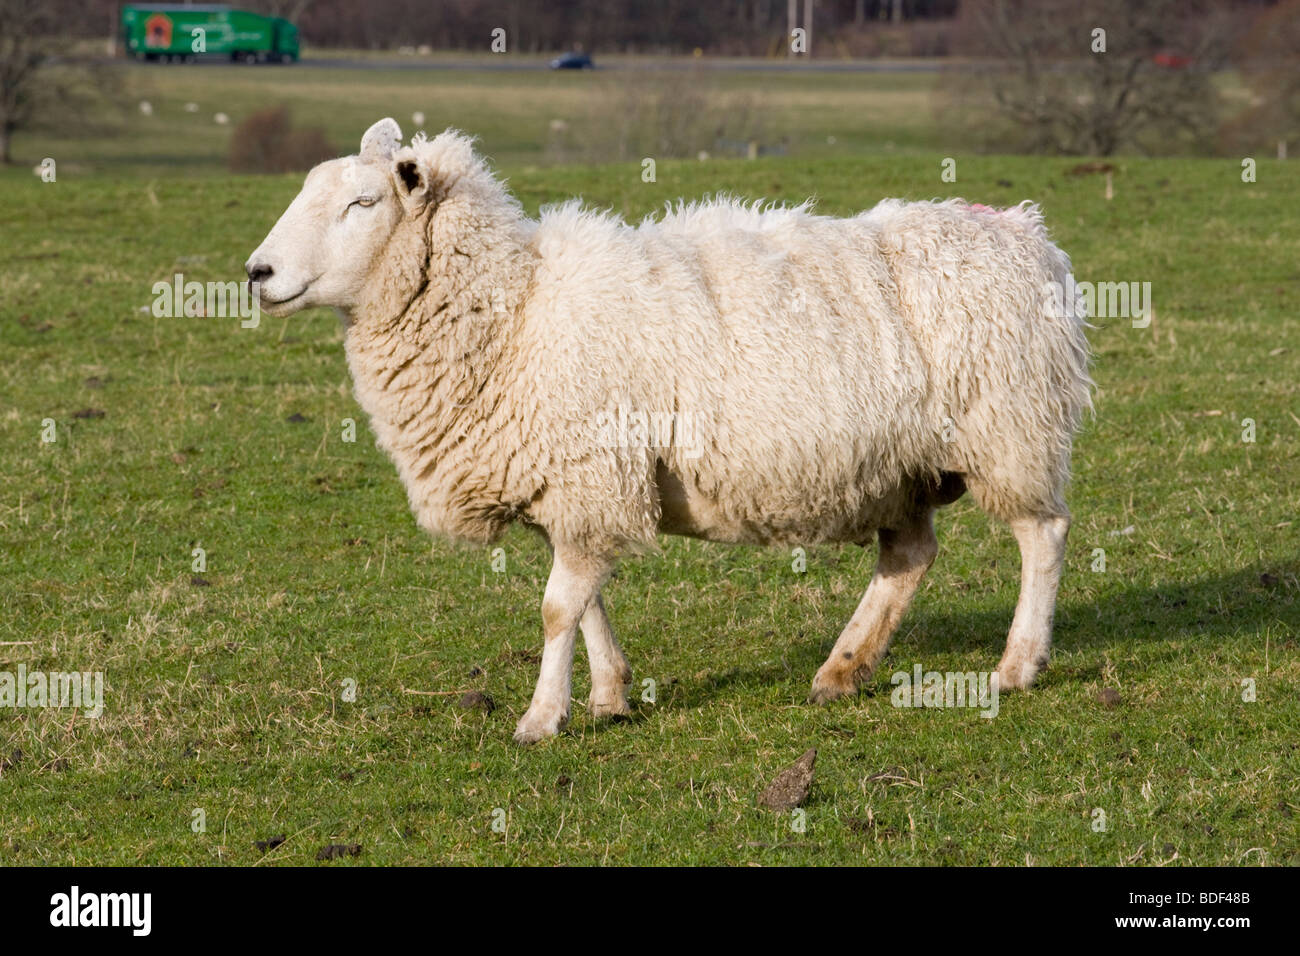 A clin cross texel mule sheep in Highland Perthshire. Stock Photo